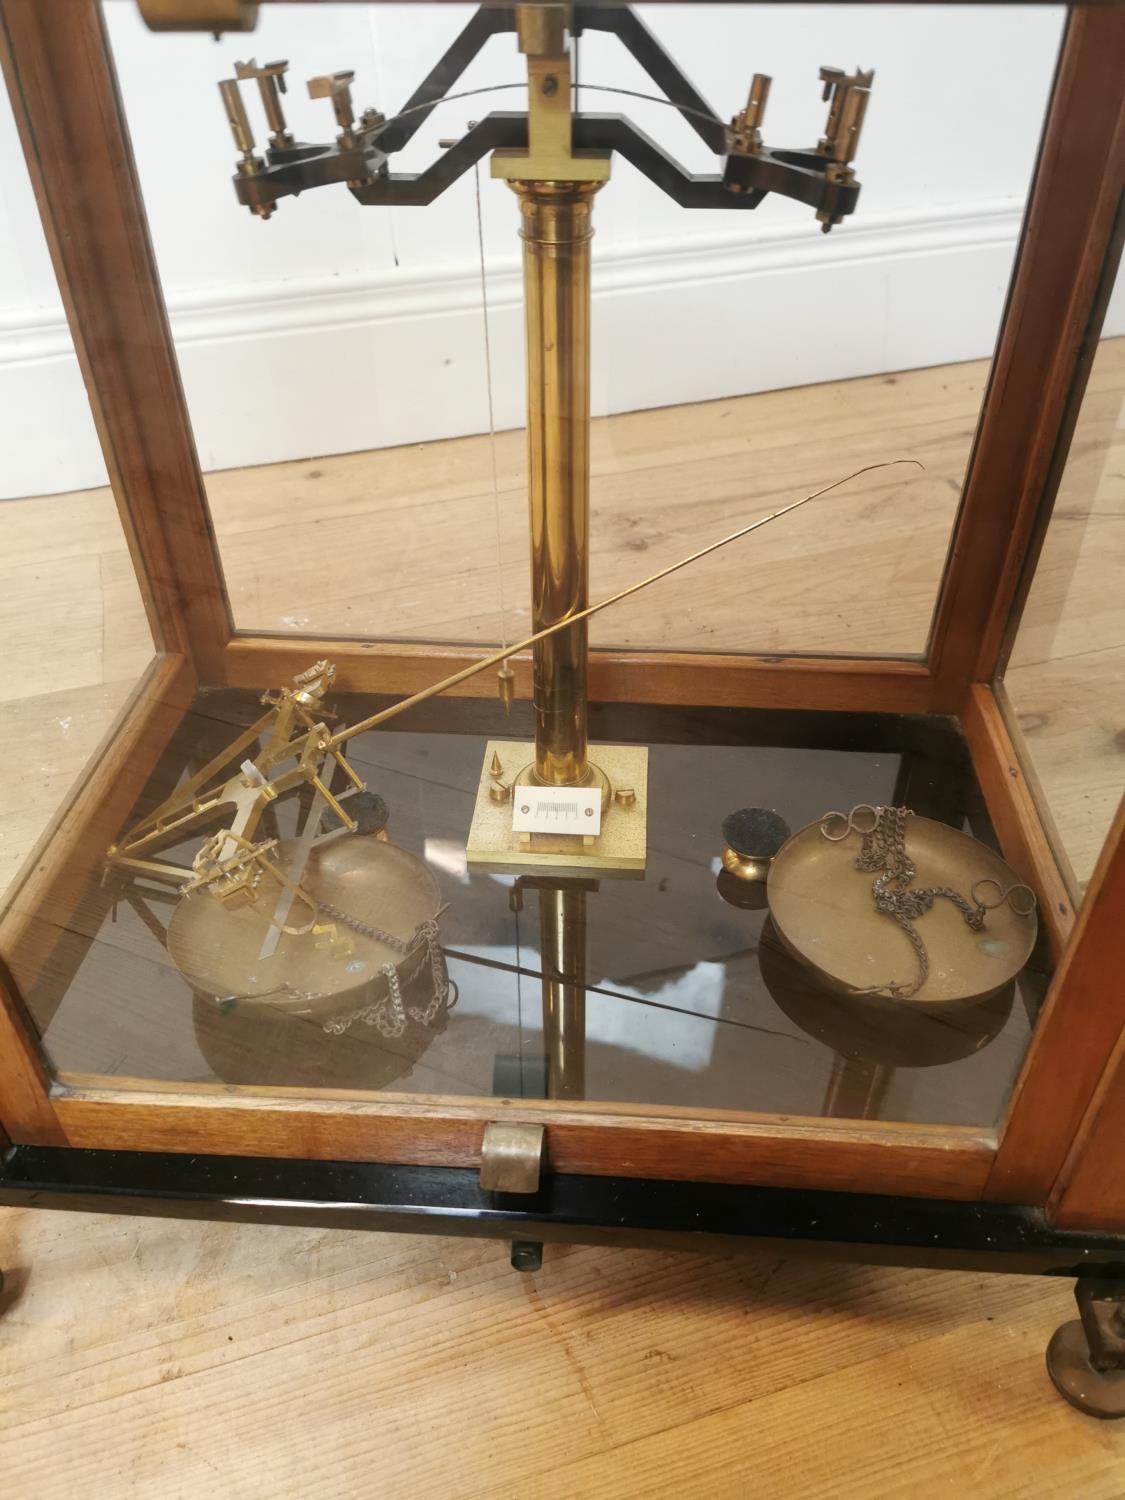 Early 20th C. mahogany cased chemist's scales - Image 2 of 3